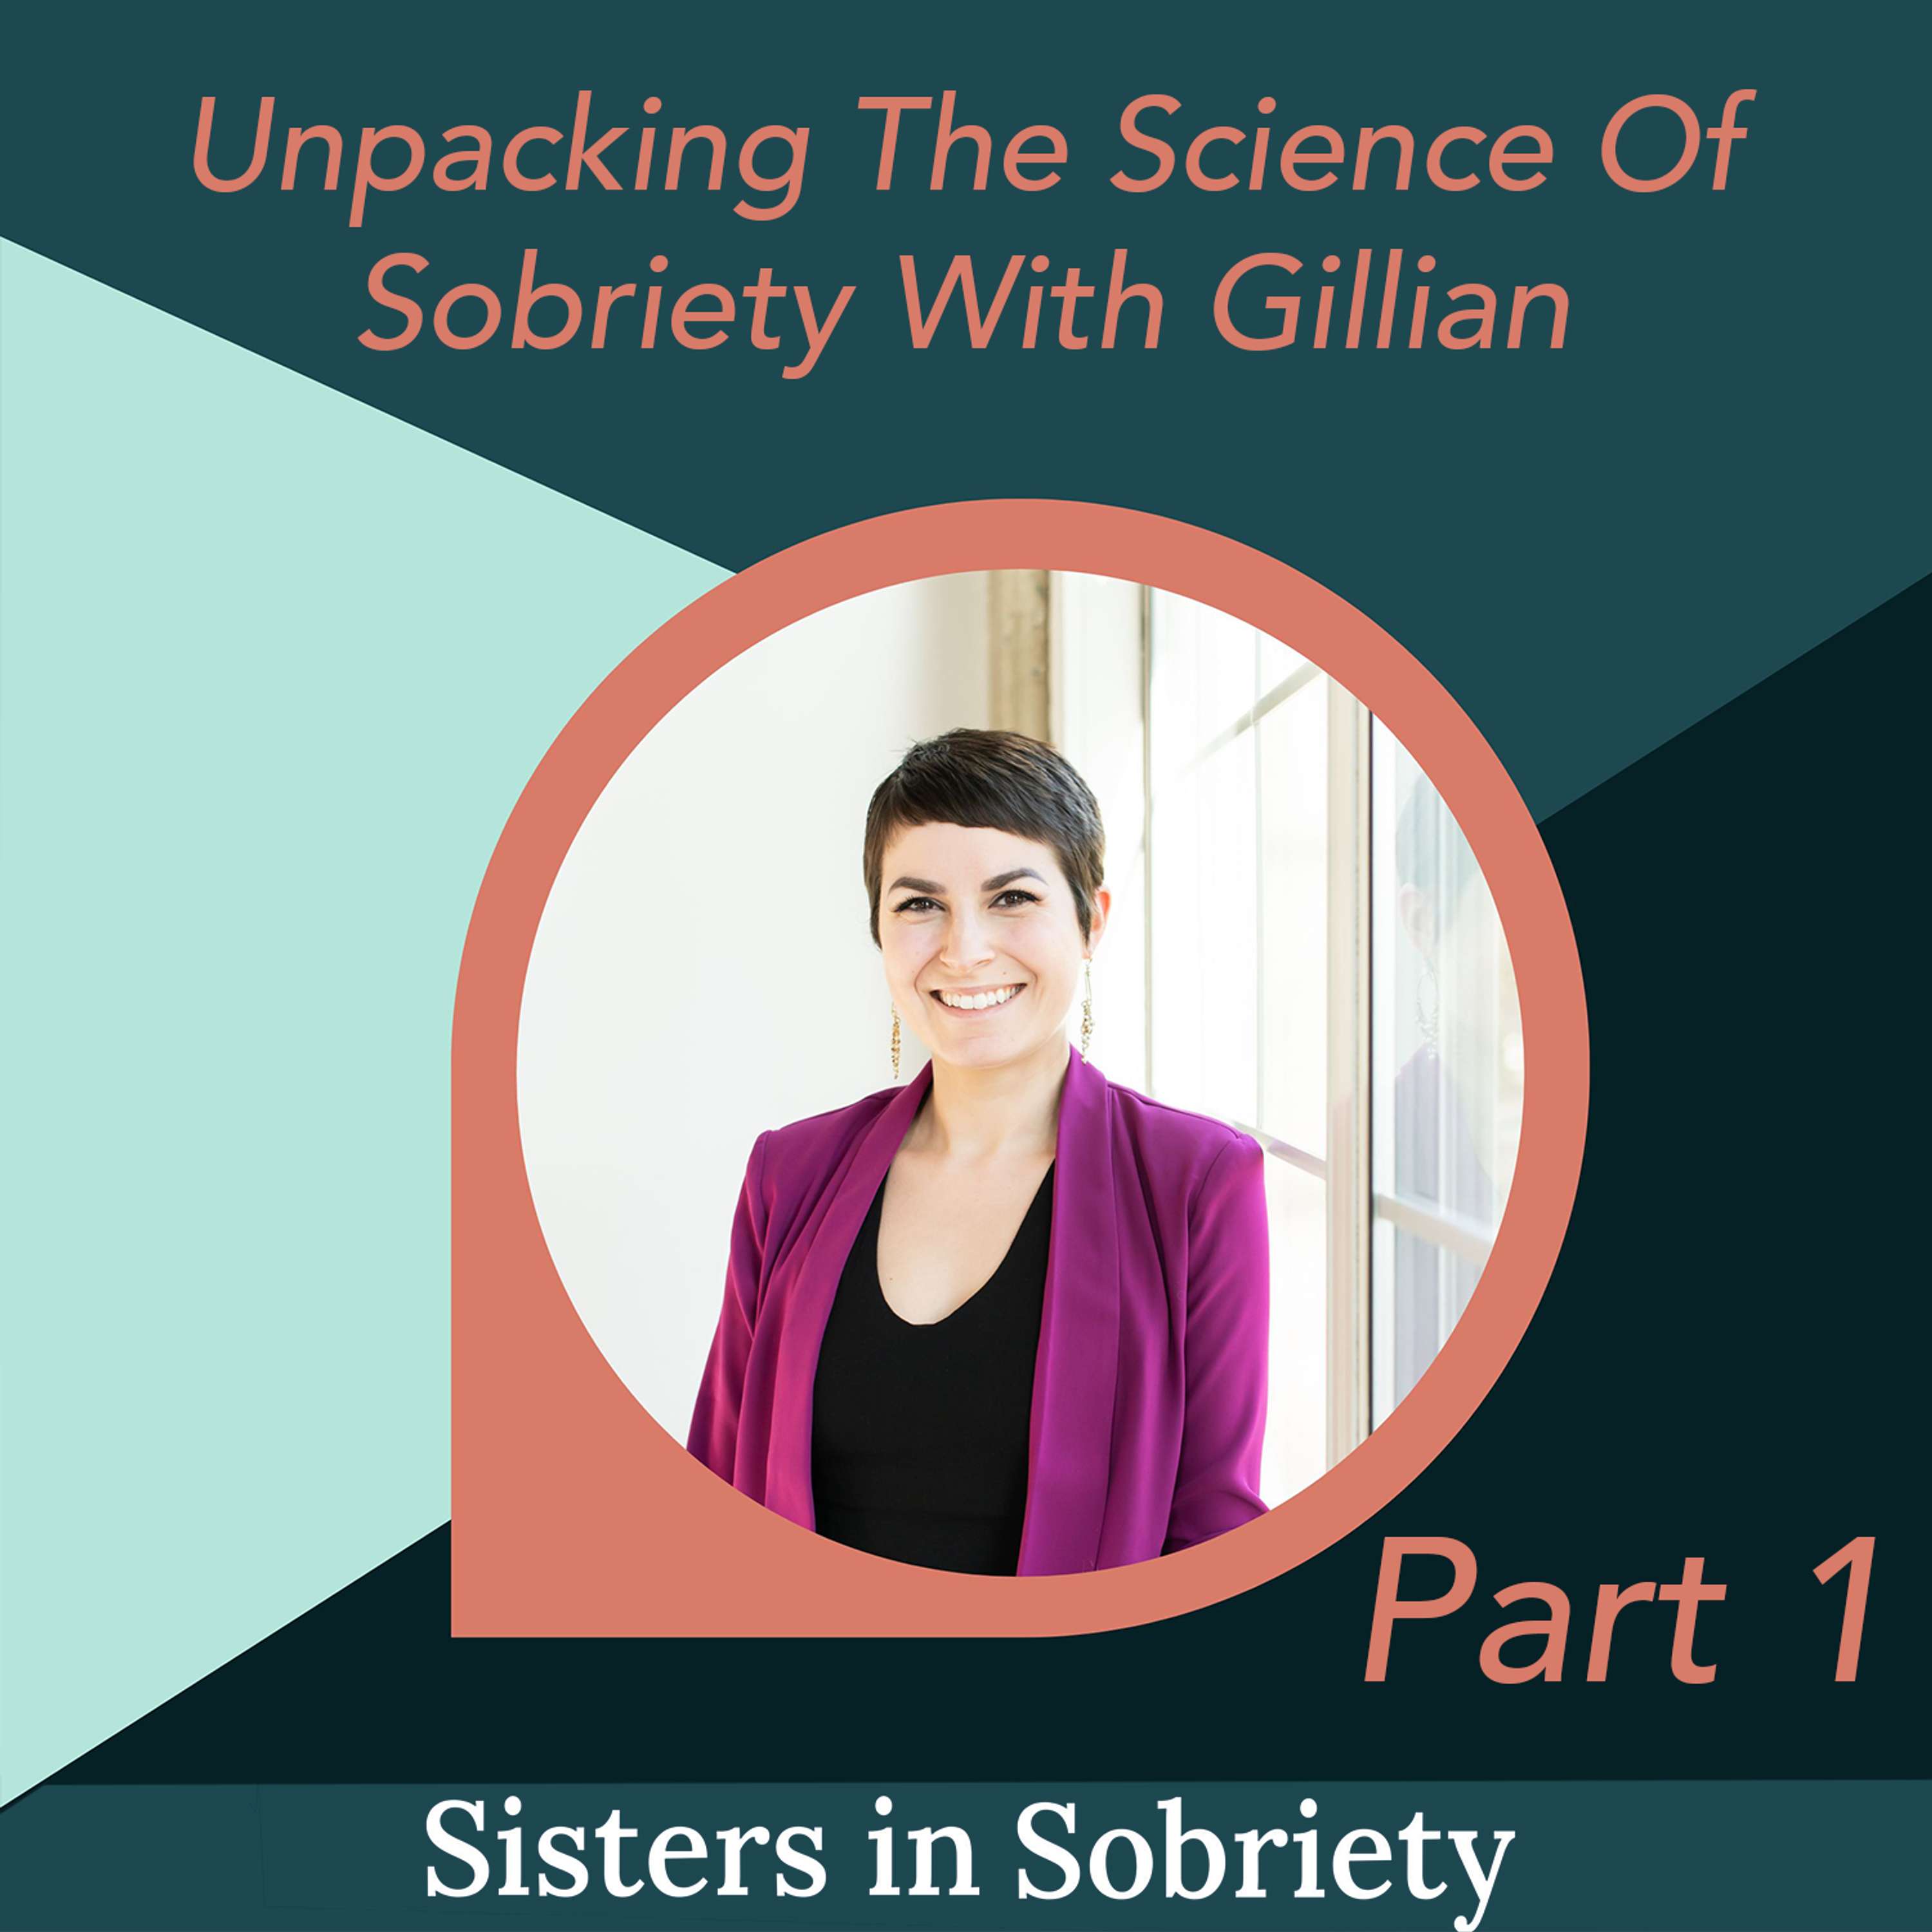 Unpacking The Science Of Sobriety With Gillian Tietz